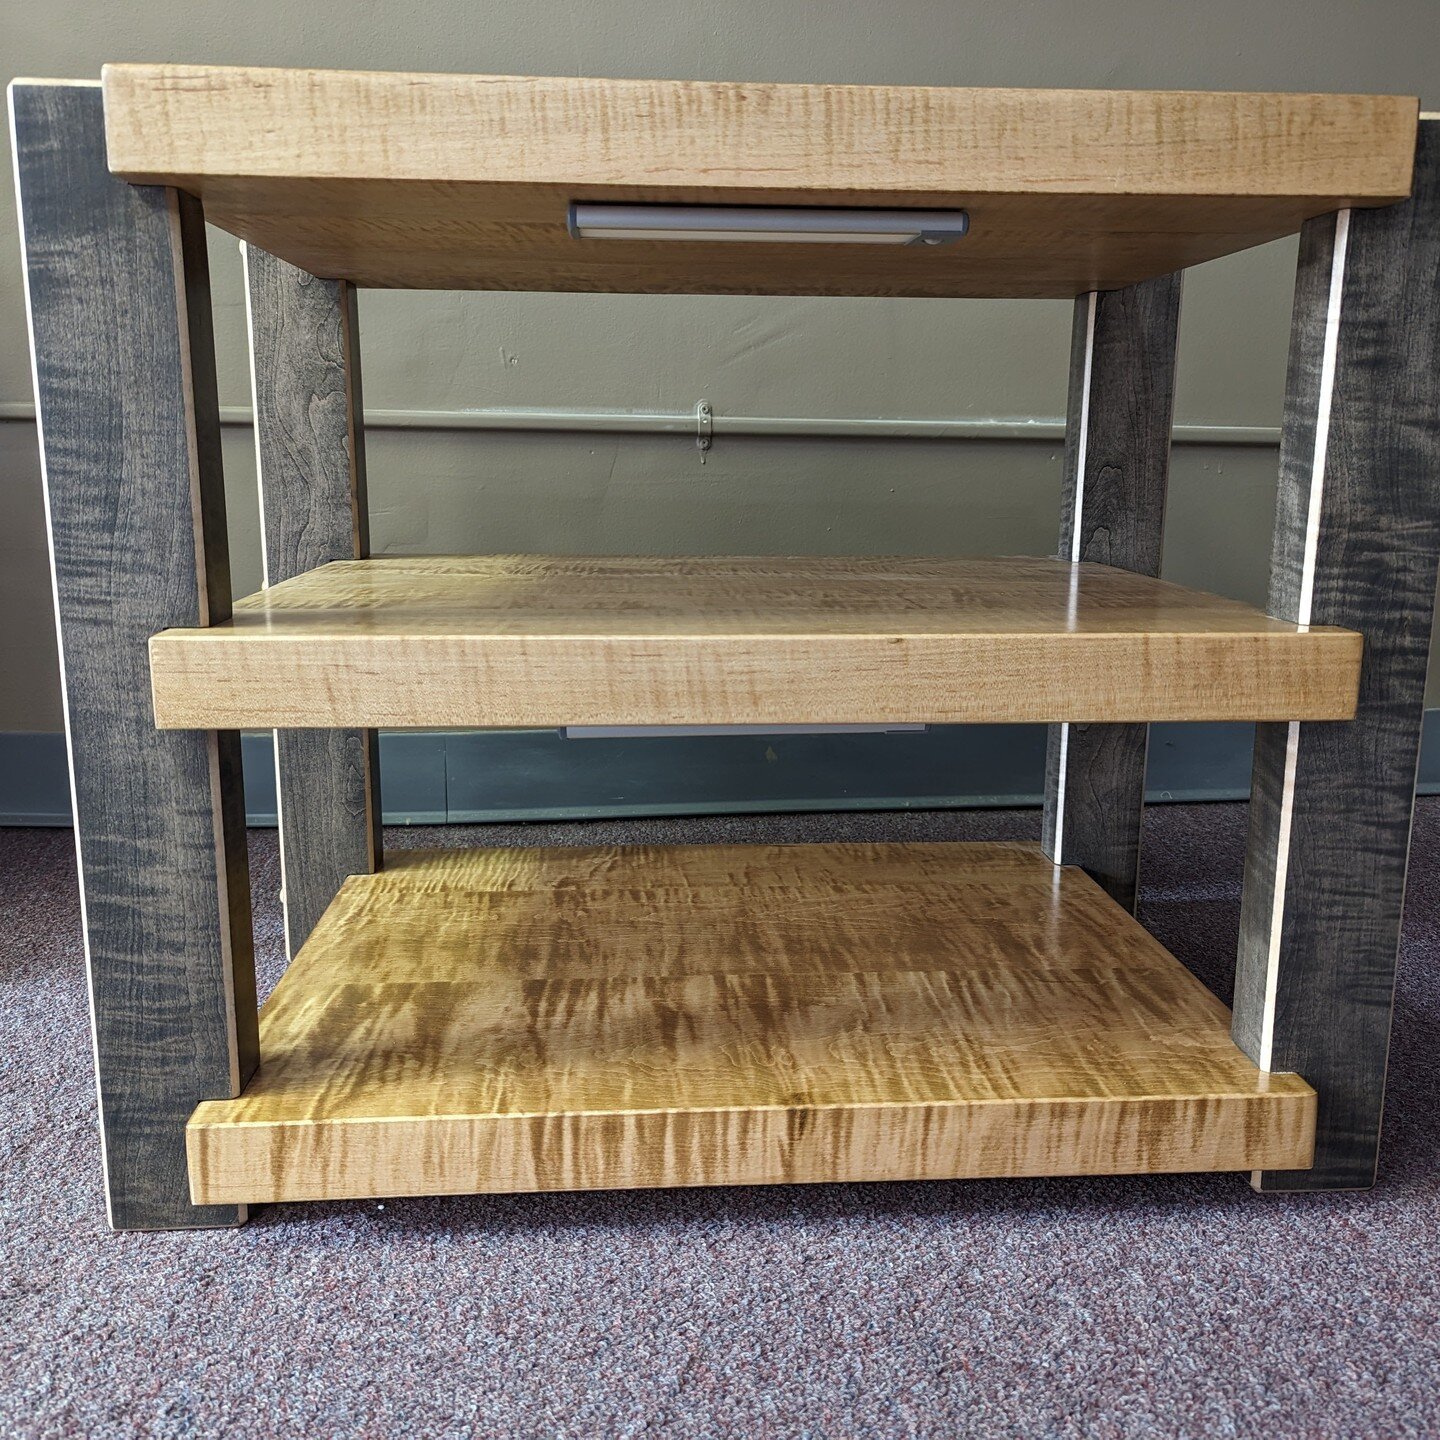 Visit our website to see some exciting changes:
Timbernation- Tiger Maple Rack

A unique, handcrafted tiger maple rack made for high end audio equipment. Just added to our BRAND-NEW category of items &quot;Ready-to-Ship&quot; which includes items tha